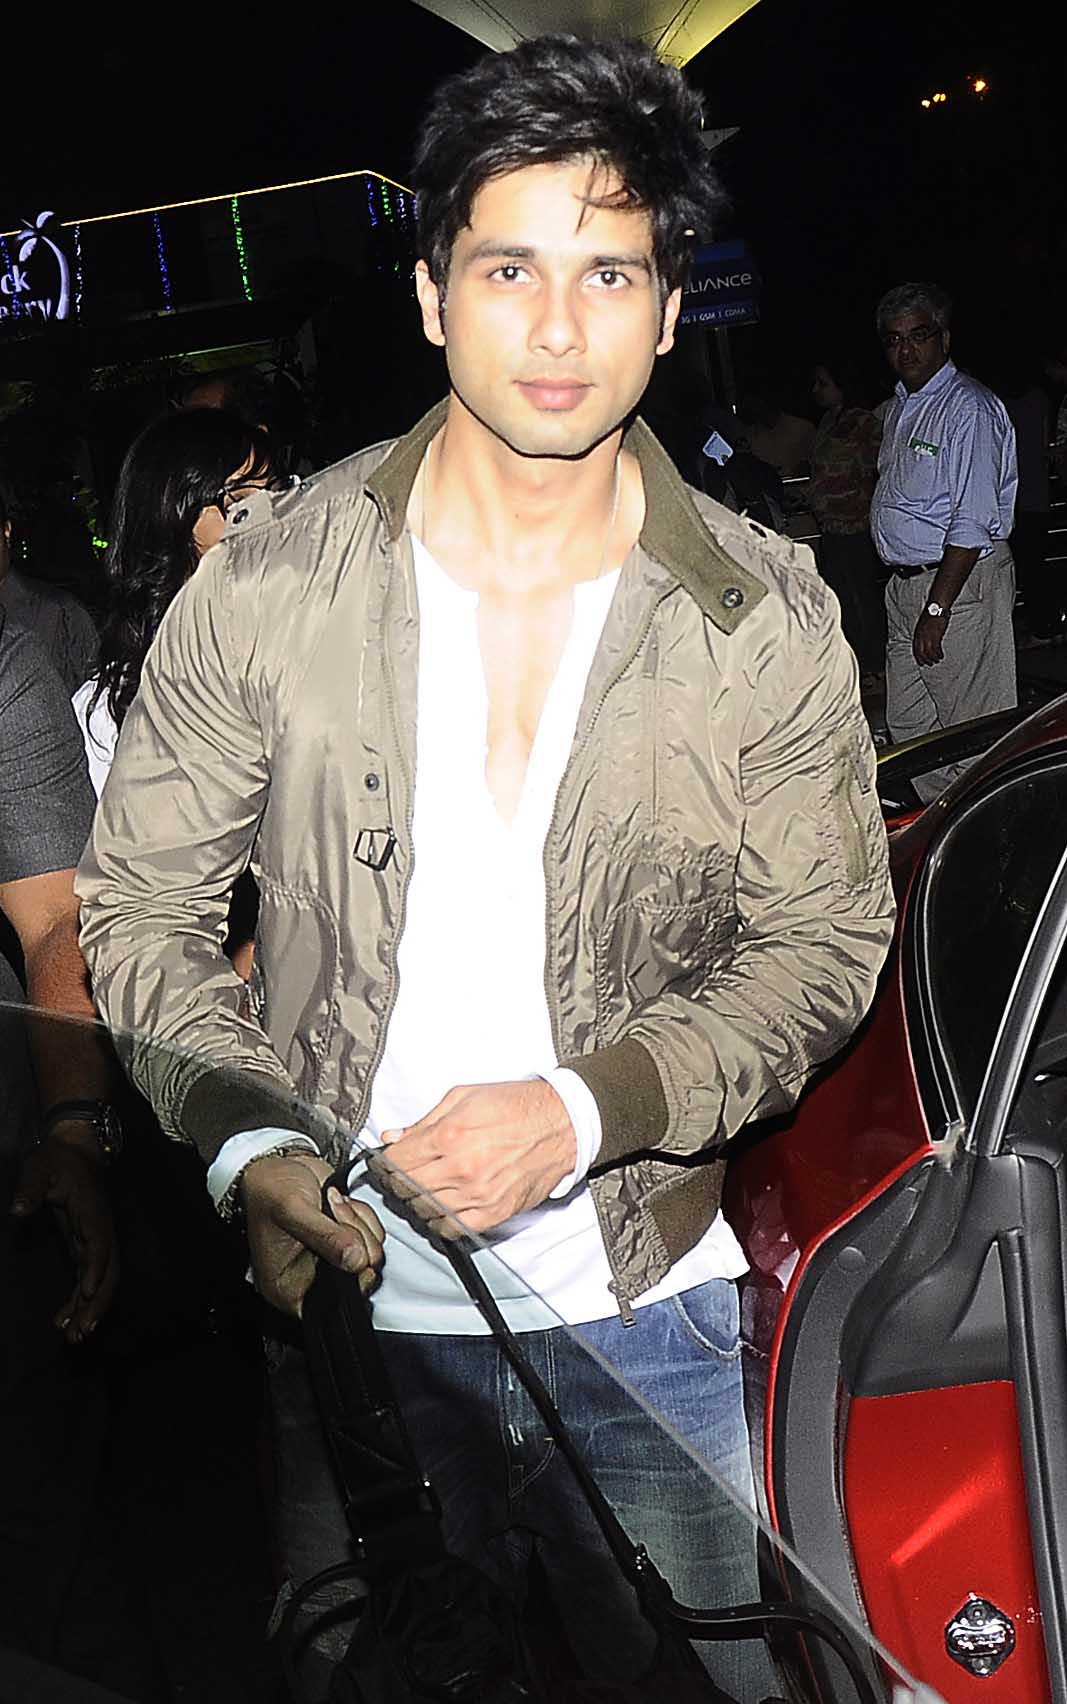 Get Shahid Kapoor’s Autumn/Winter Style. (Buy a Bomber Jacket!)